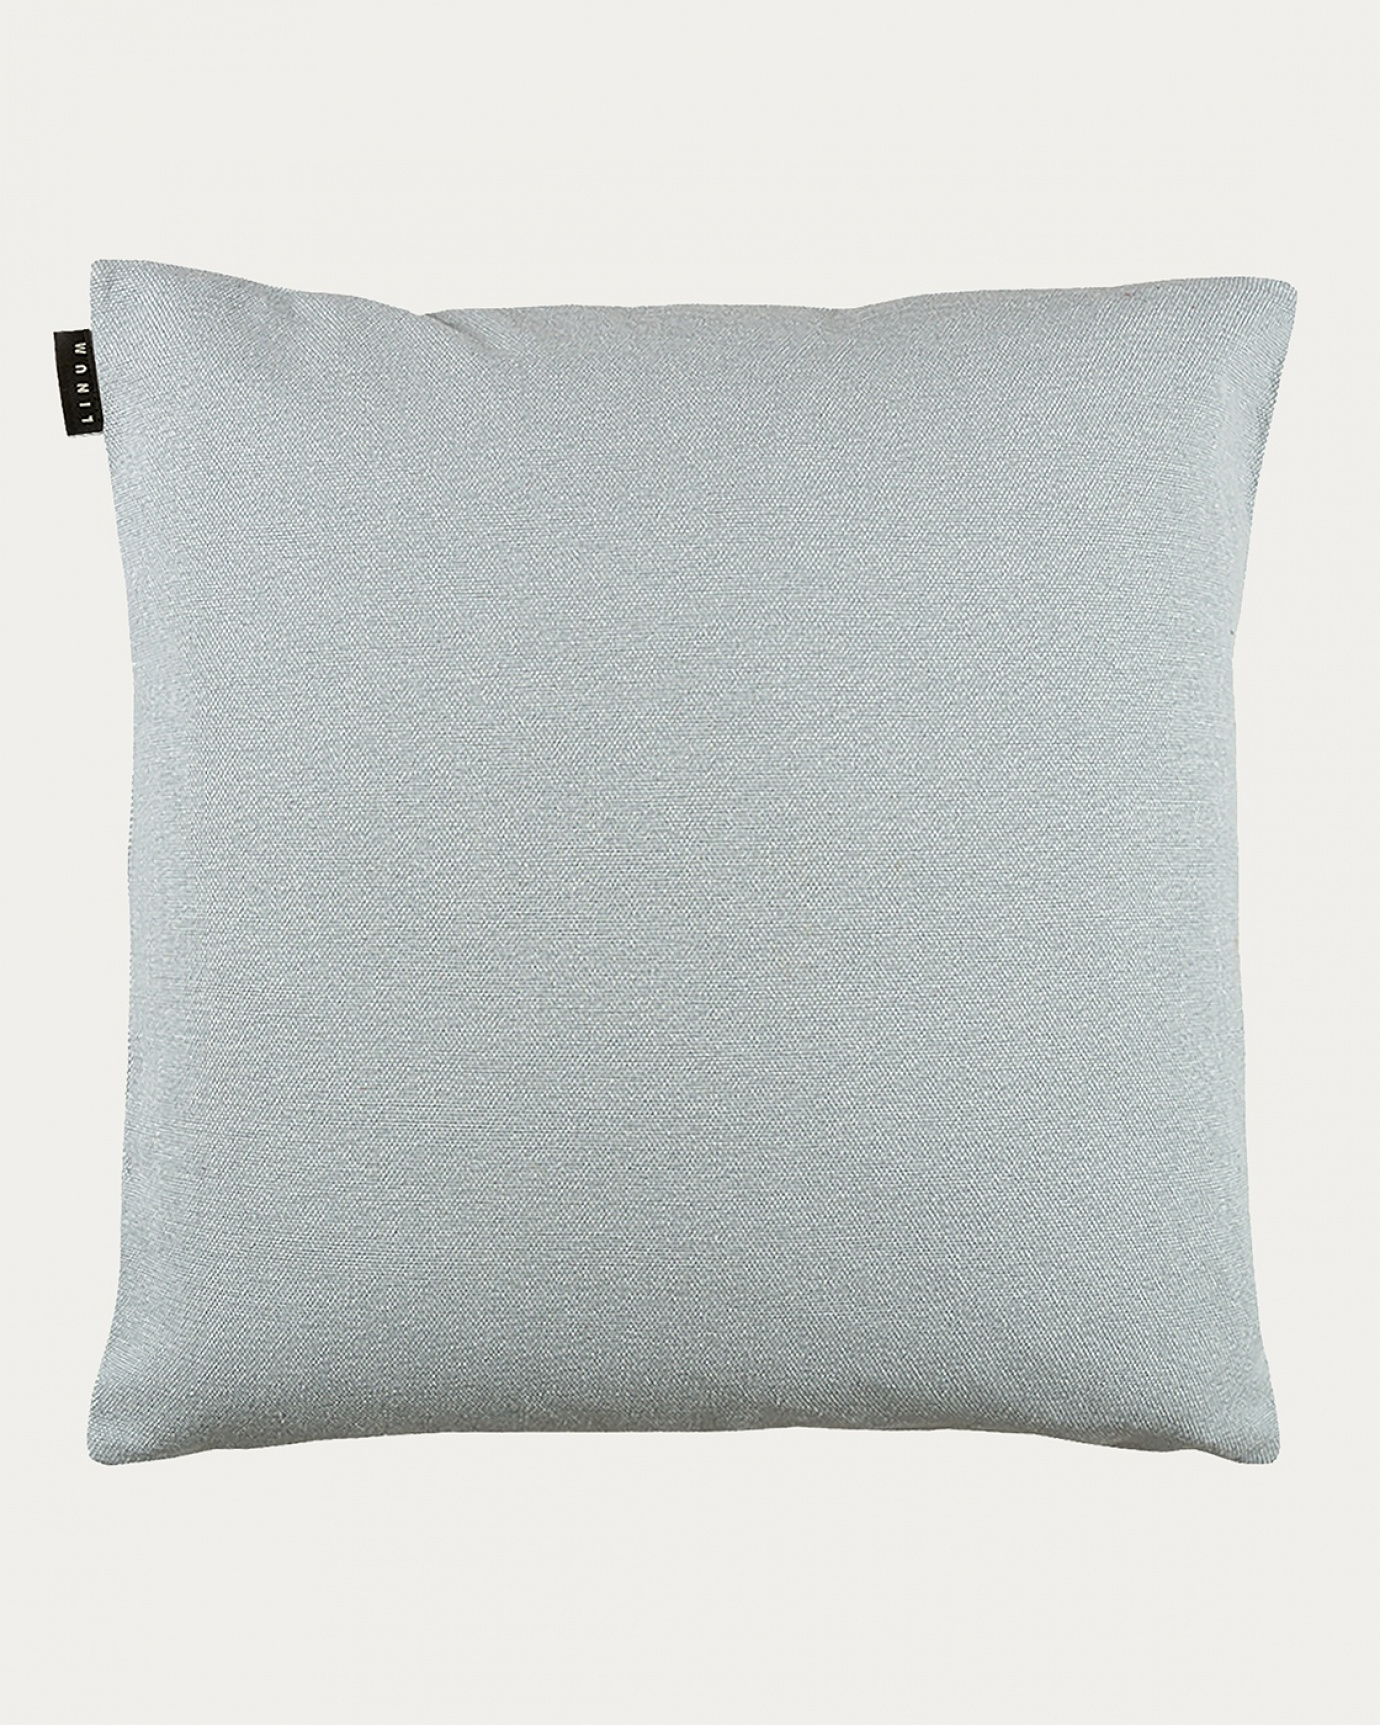 Product image light grey blue PEPPER cushion cover made of soft cotton from LINUM DESIGN. Easy to wash and durable for generations. Size 60x60 cm.